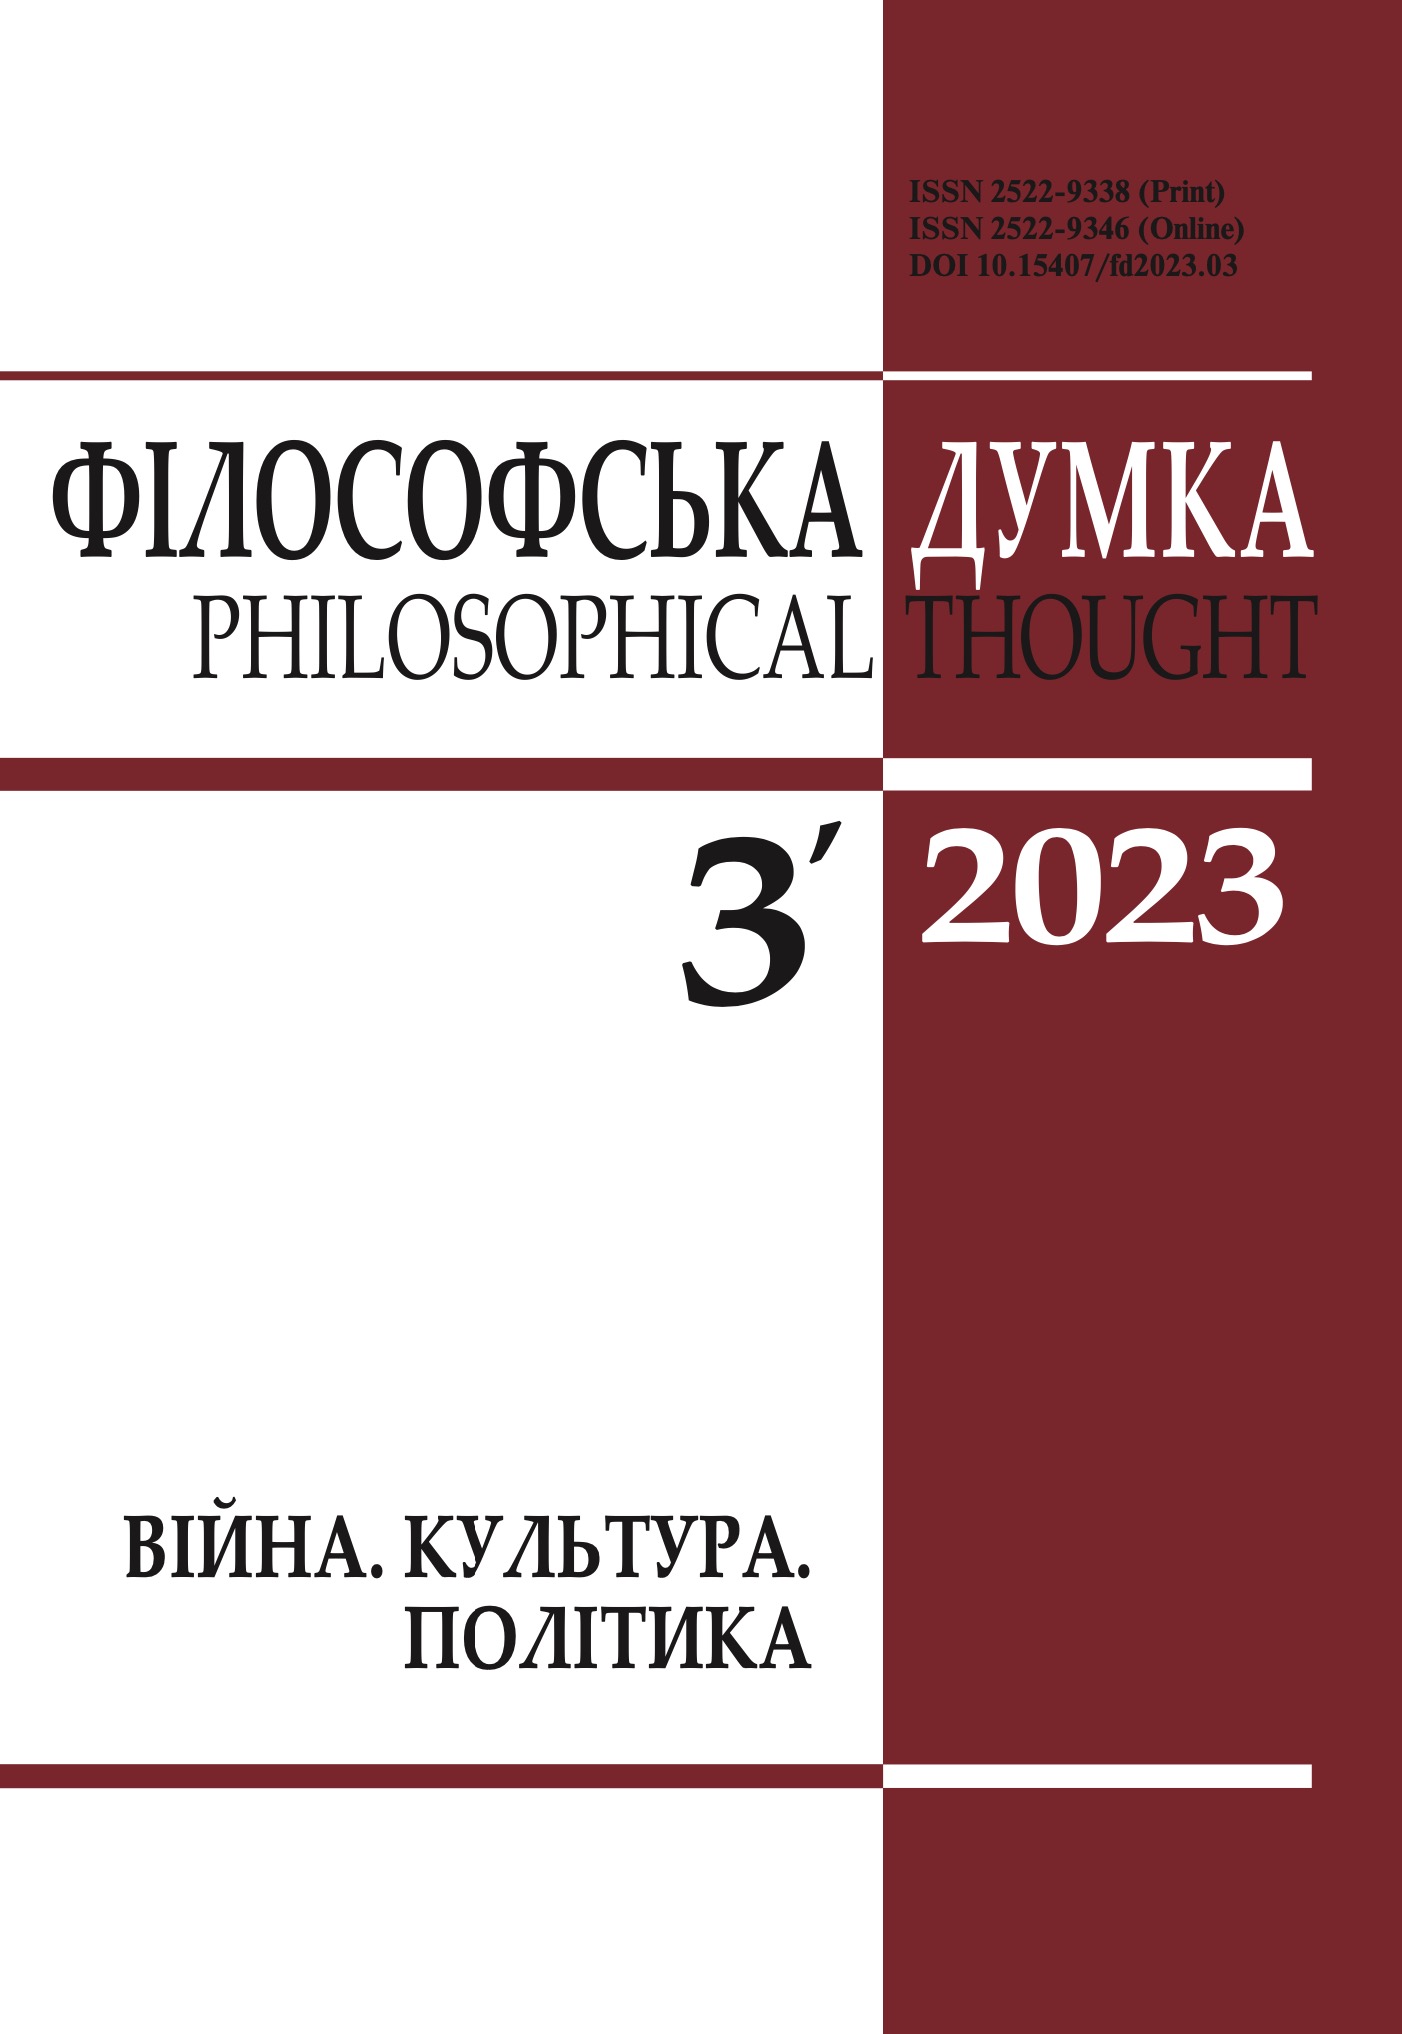 					View No. 3 (2023): Philosophical thought
				